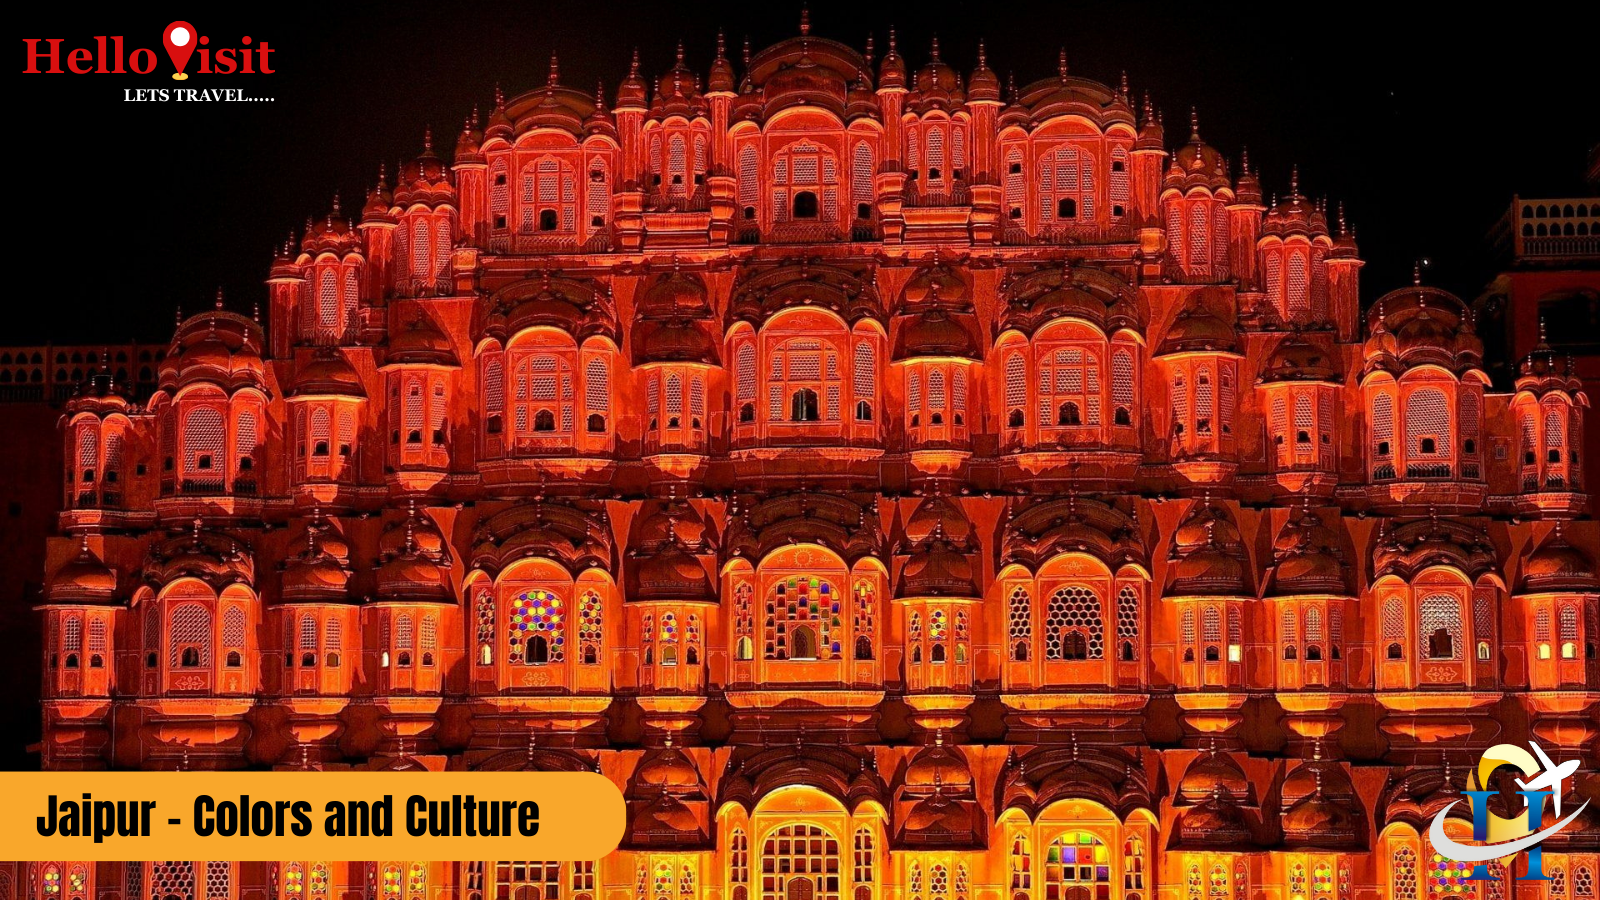 Jaipur - Colors and Culture